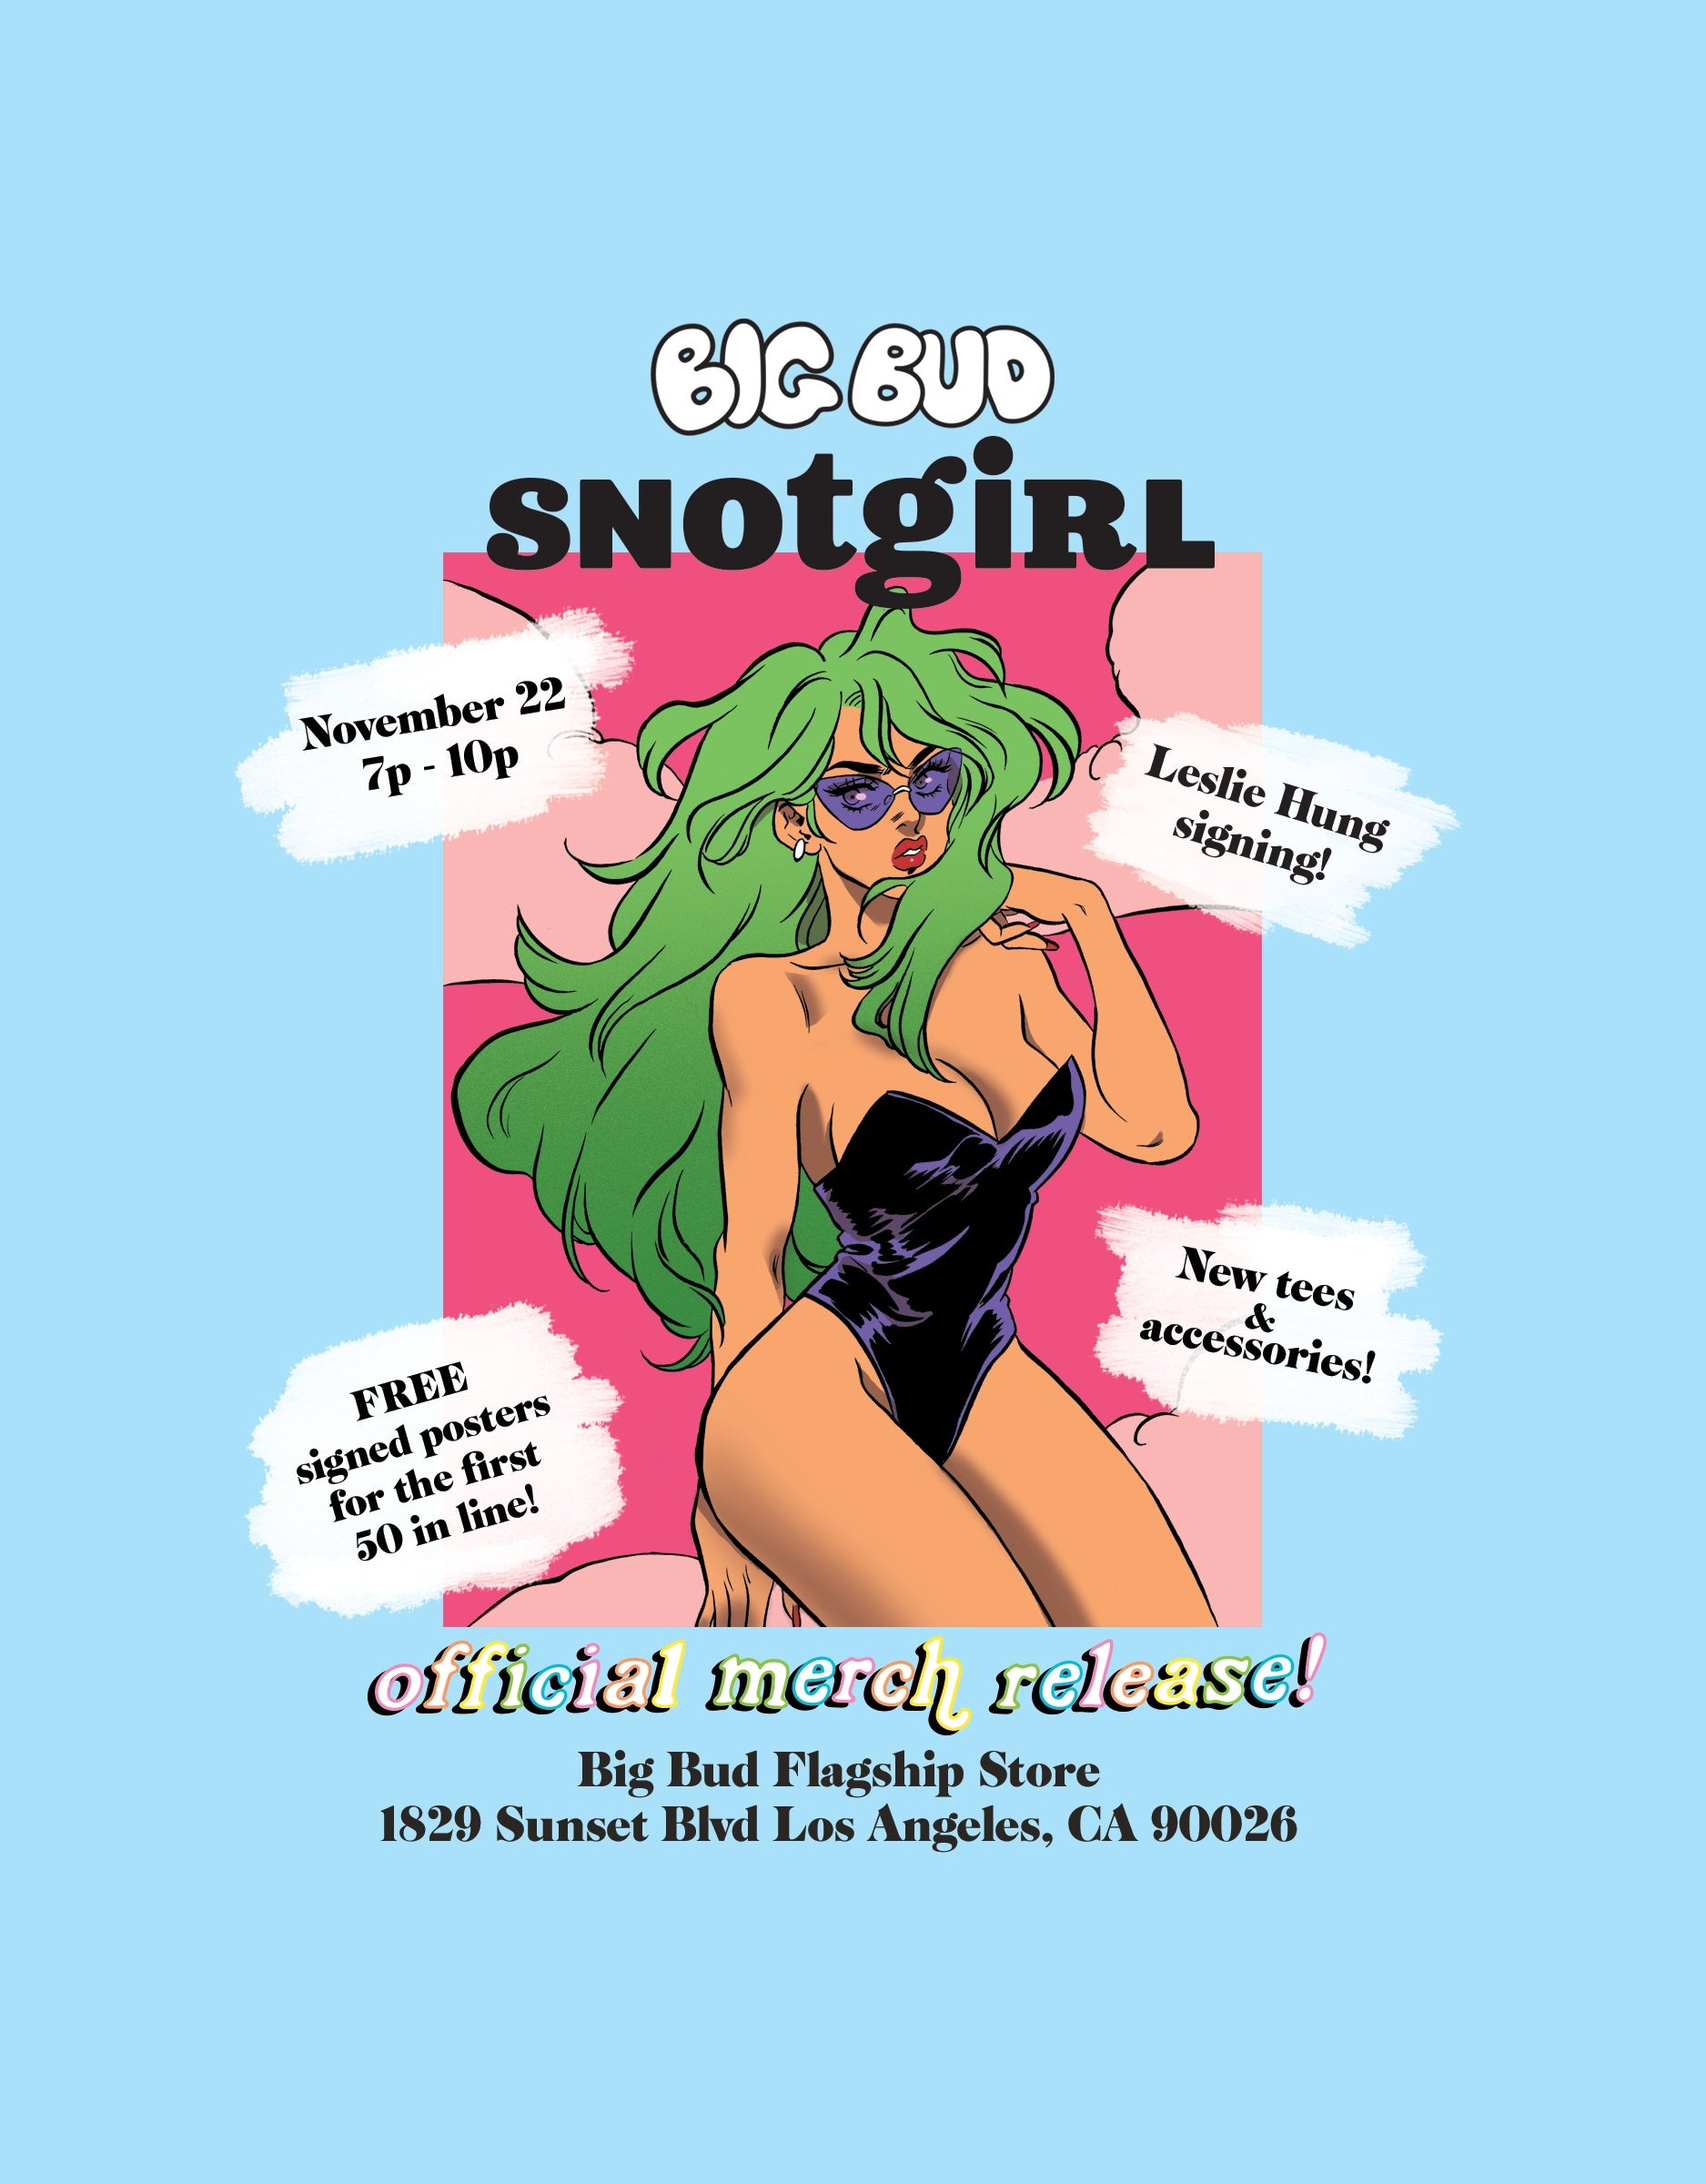 Snotgirl x Big Bud Collaboration Launch Party 11/22!!!